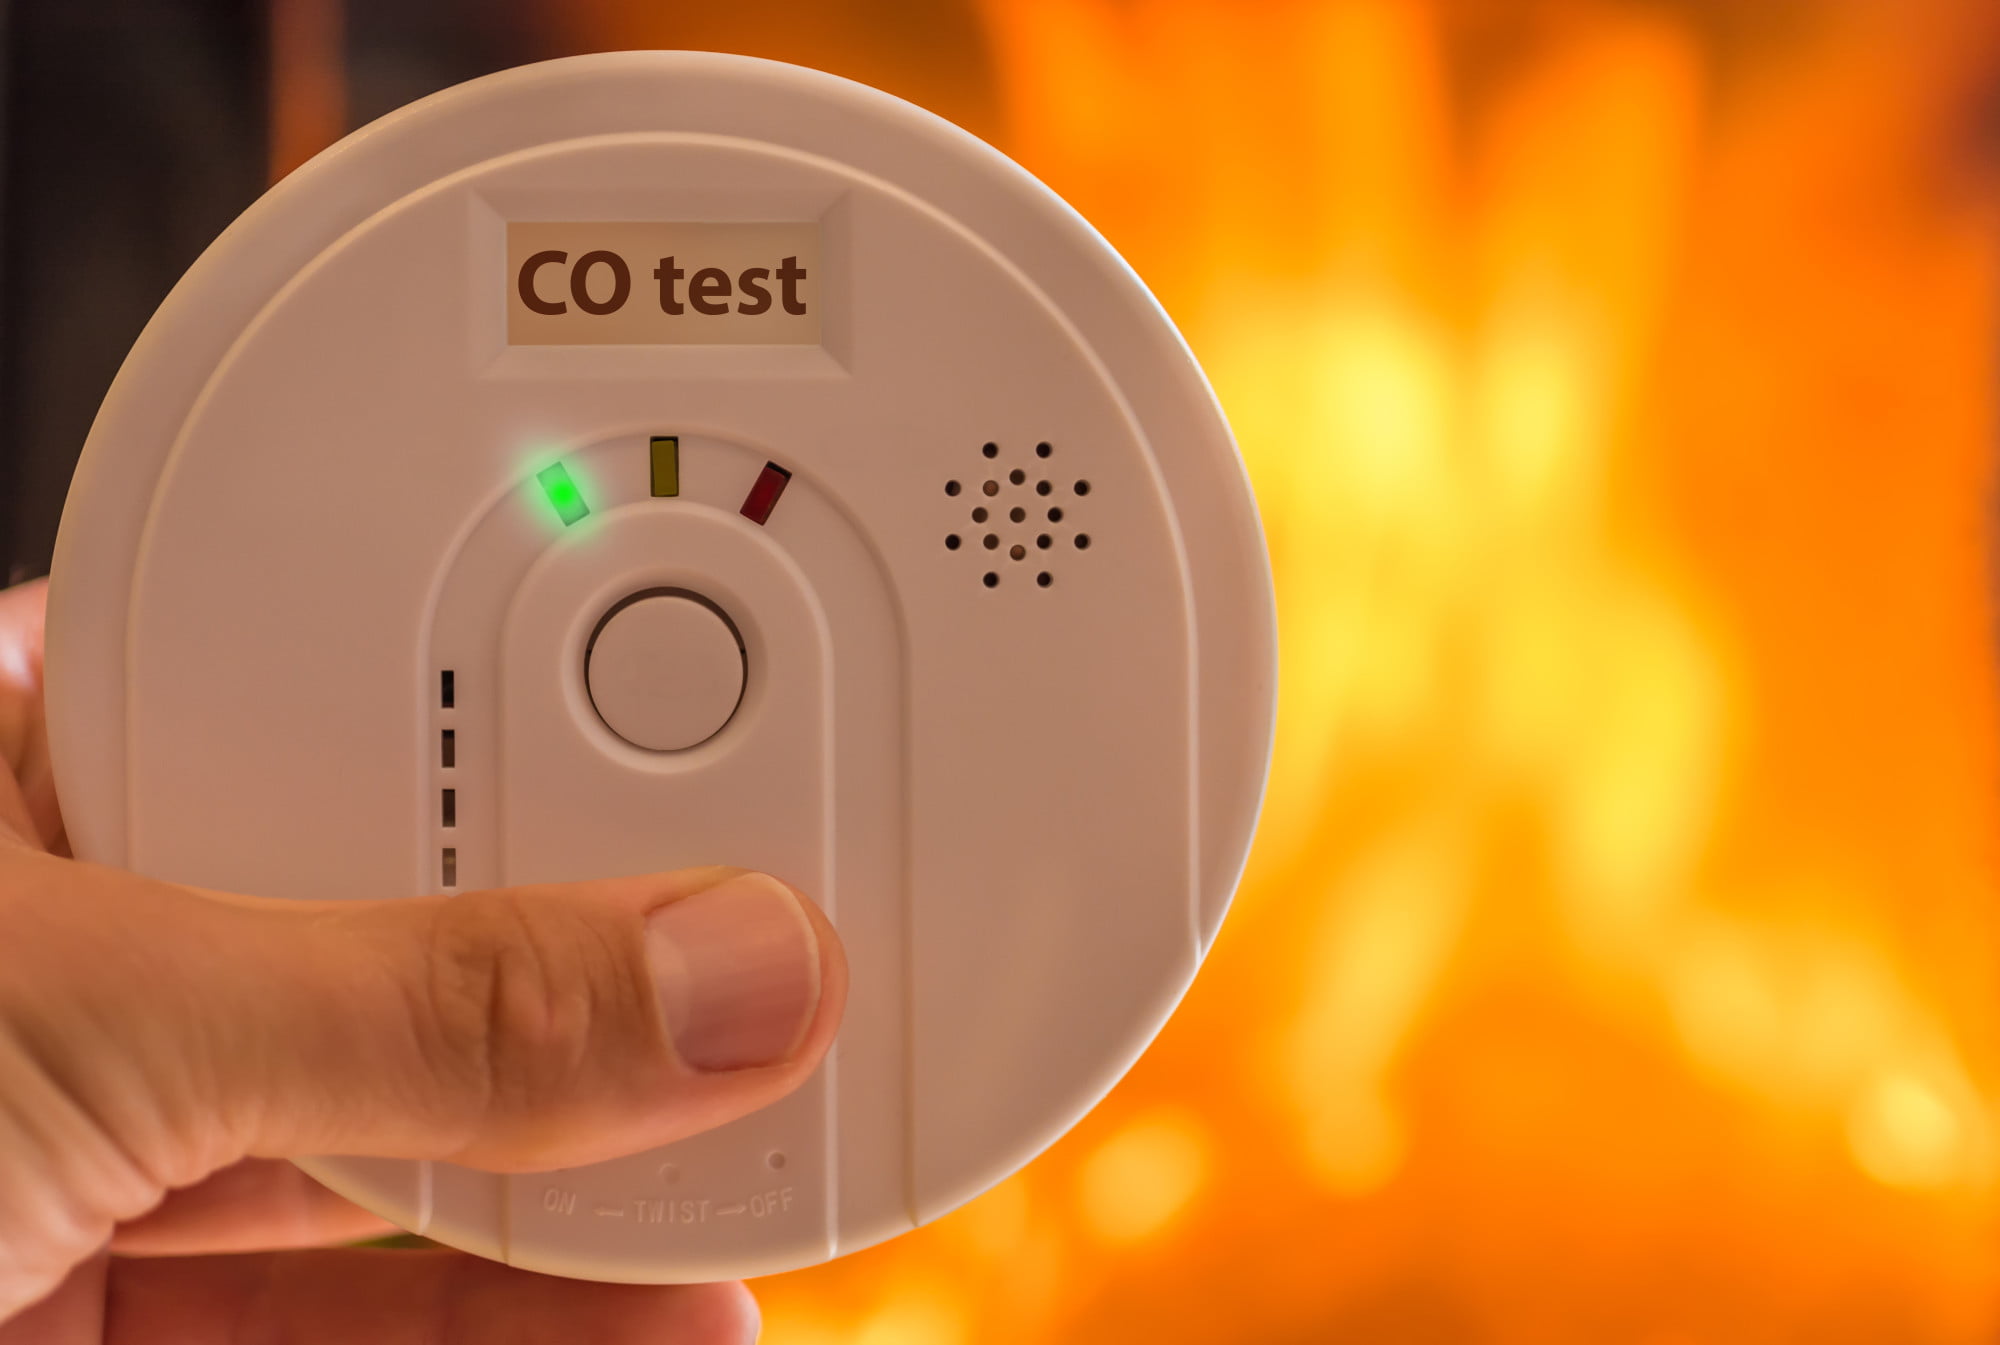 Carbon monoxide poisoning can easily happen on accident at home and get quite serious, so how can it be treated? Learn more here.